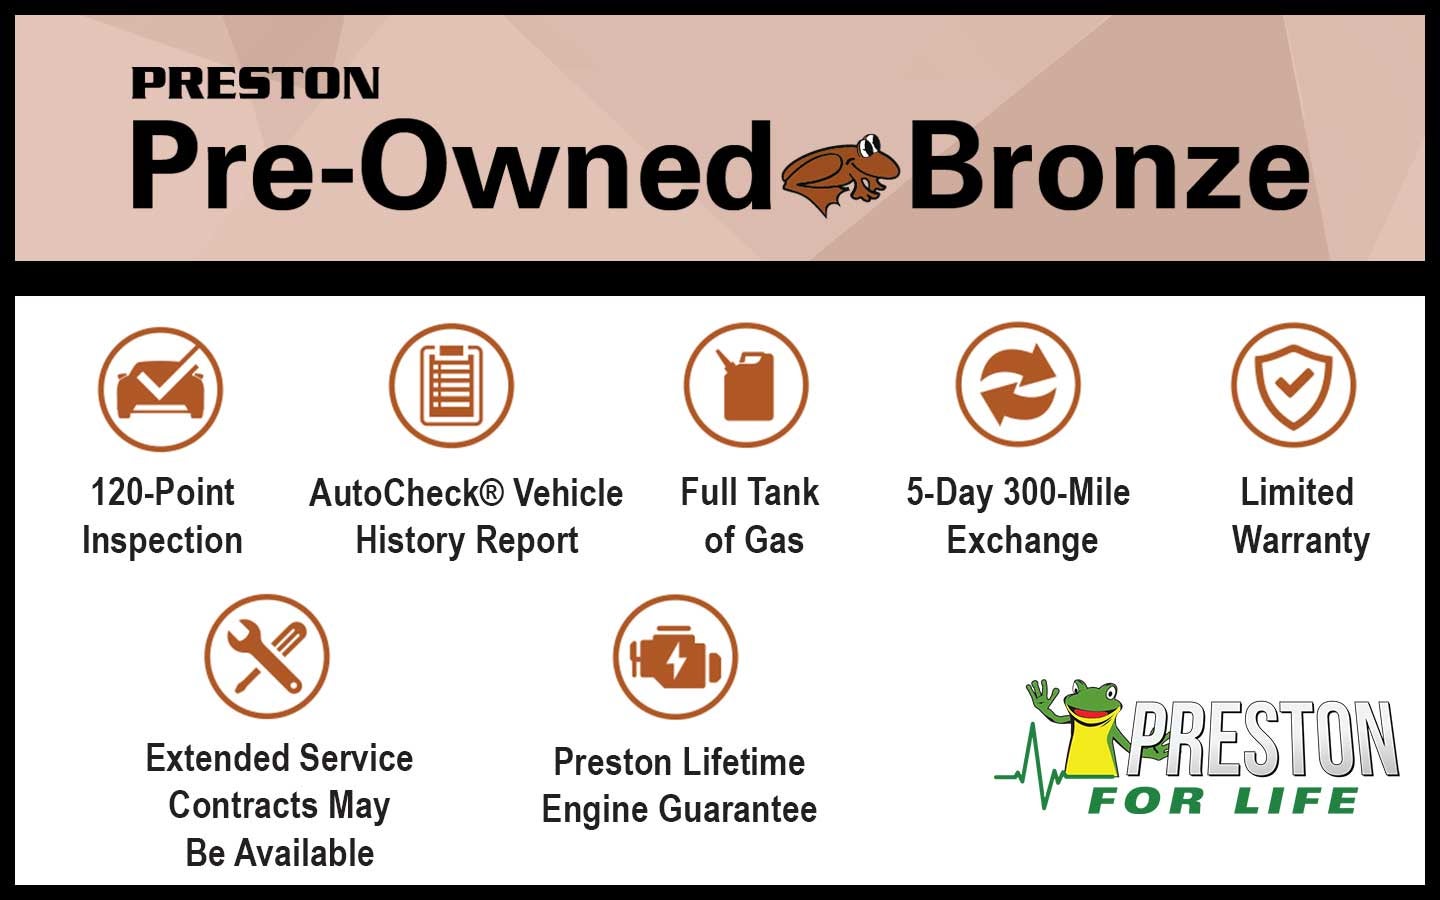 Pre-Owned Bronze at Preston Ford Commercial Vehicle Center in Hurlock MD